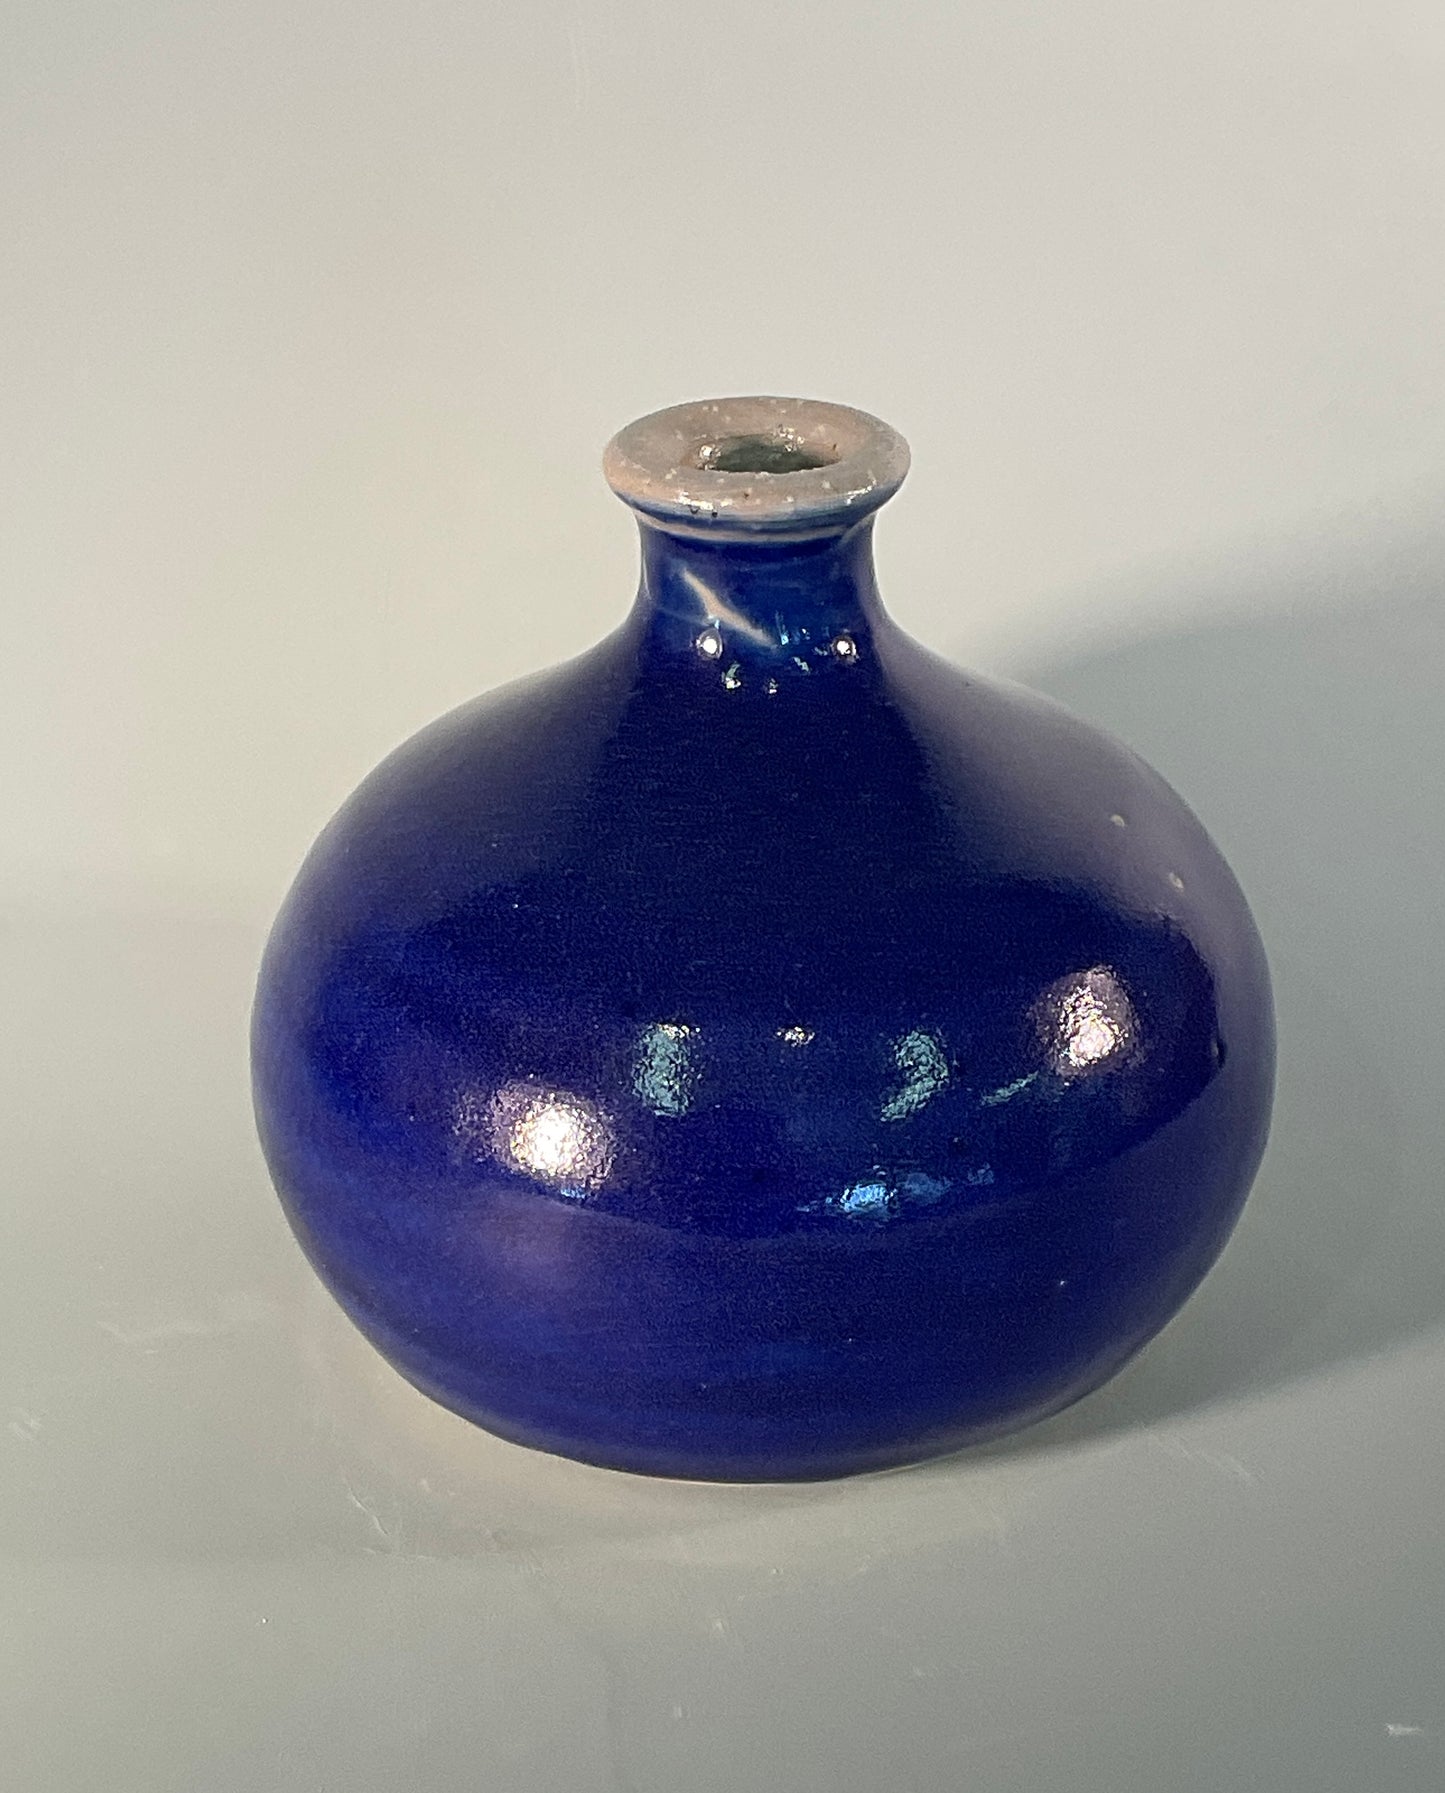 Solid blue color  Nice size round vase With blue glaze and small flair at rim  5" Long  x 5" Wide x 4" Tall  Beautiful hand thrown stoneware vase  Dishwasher safe